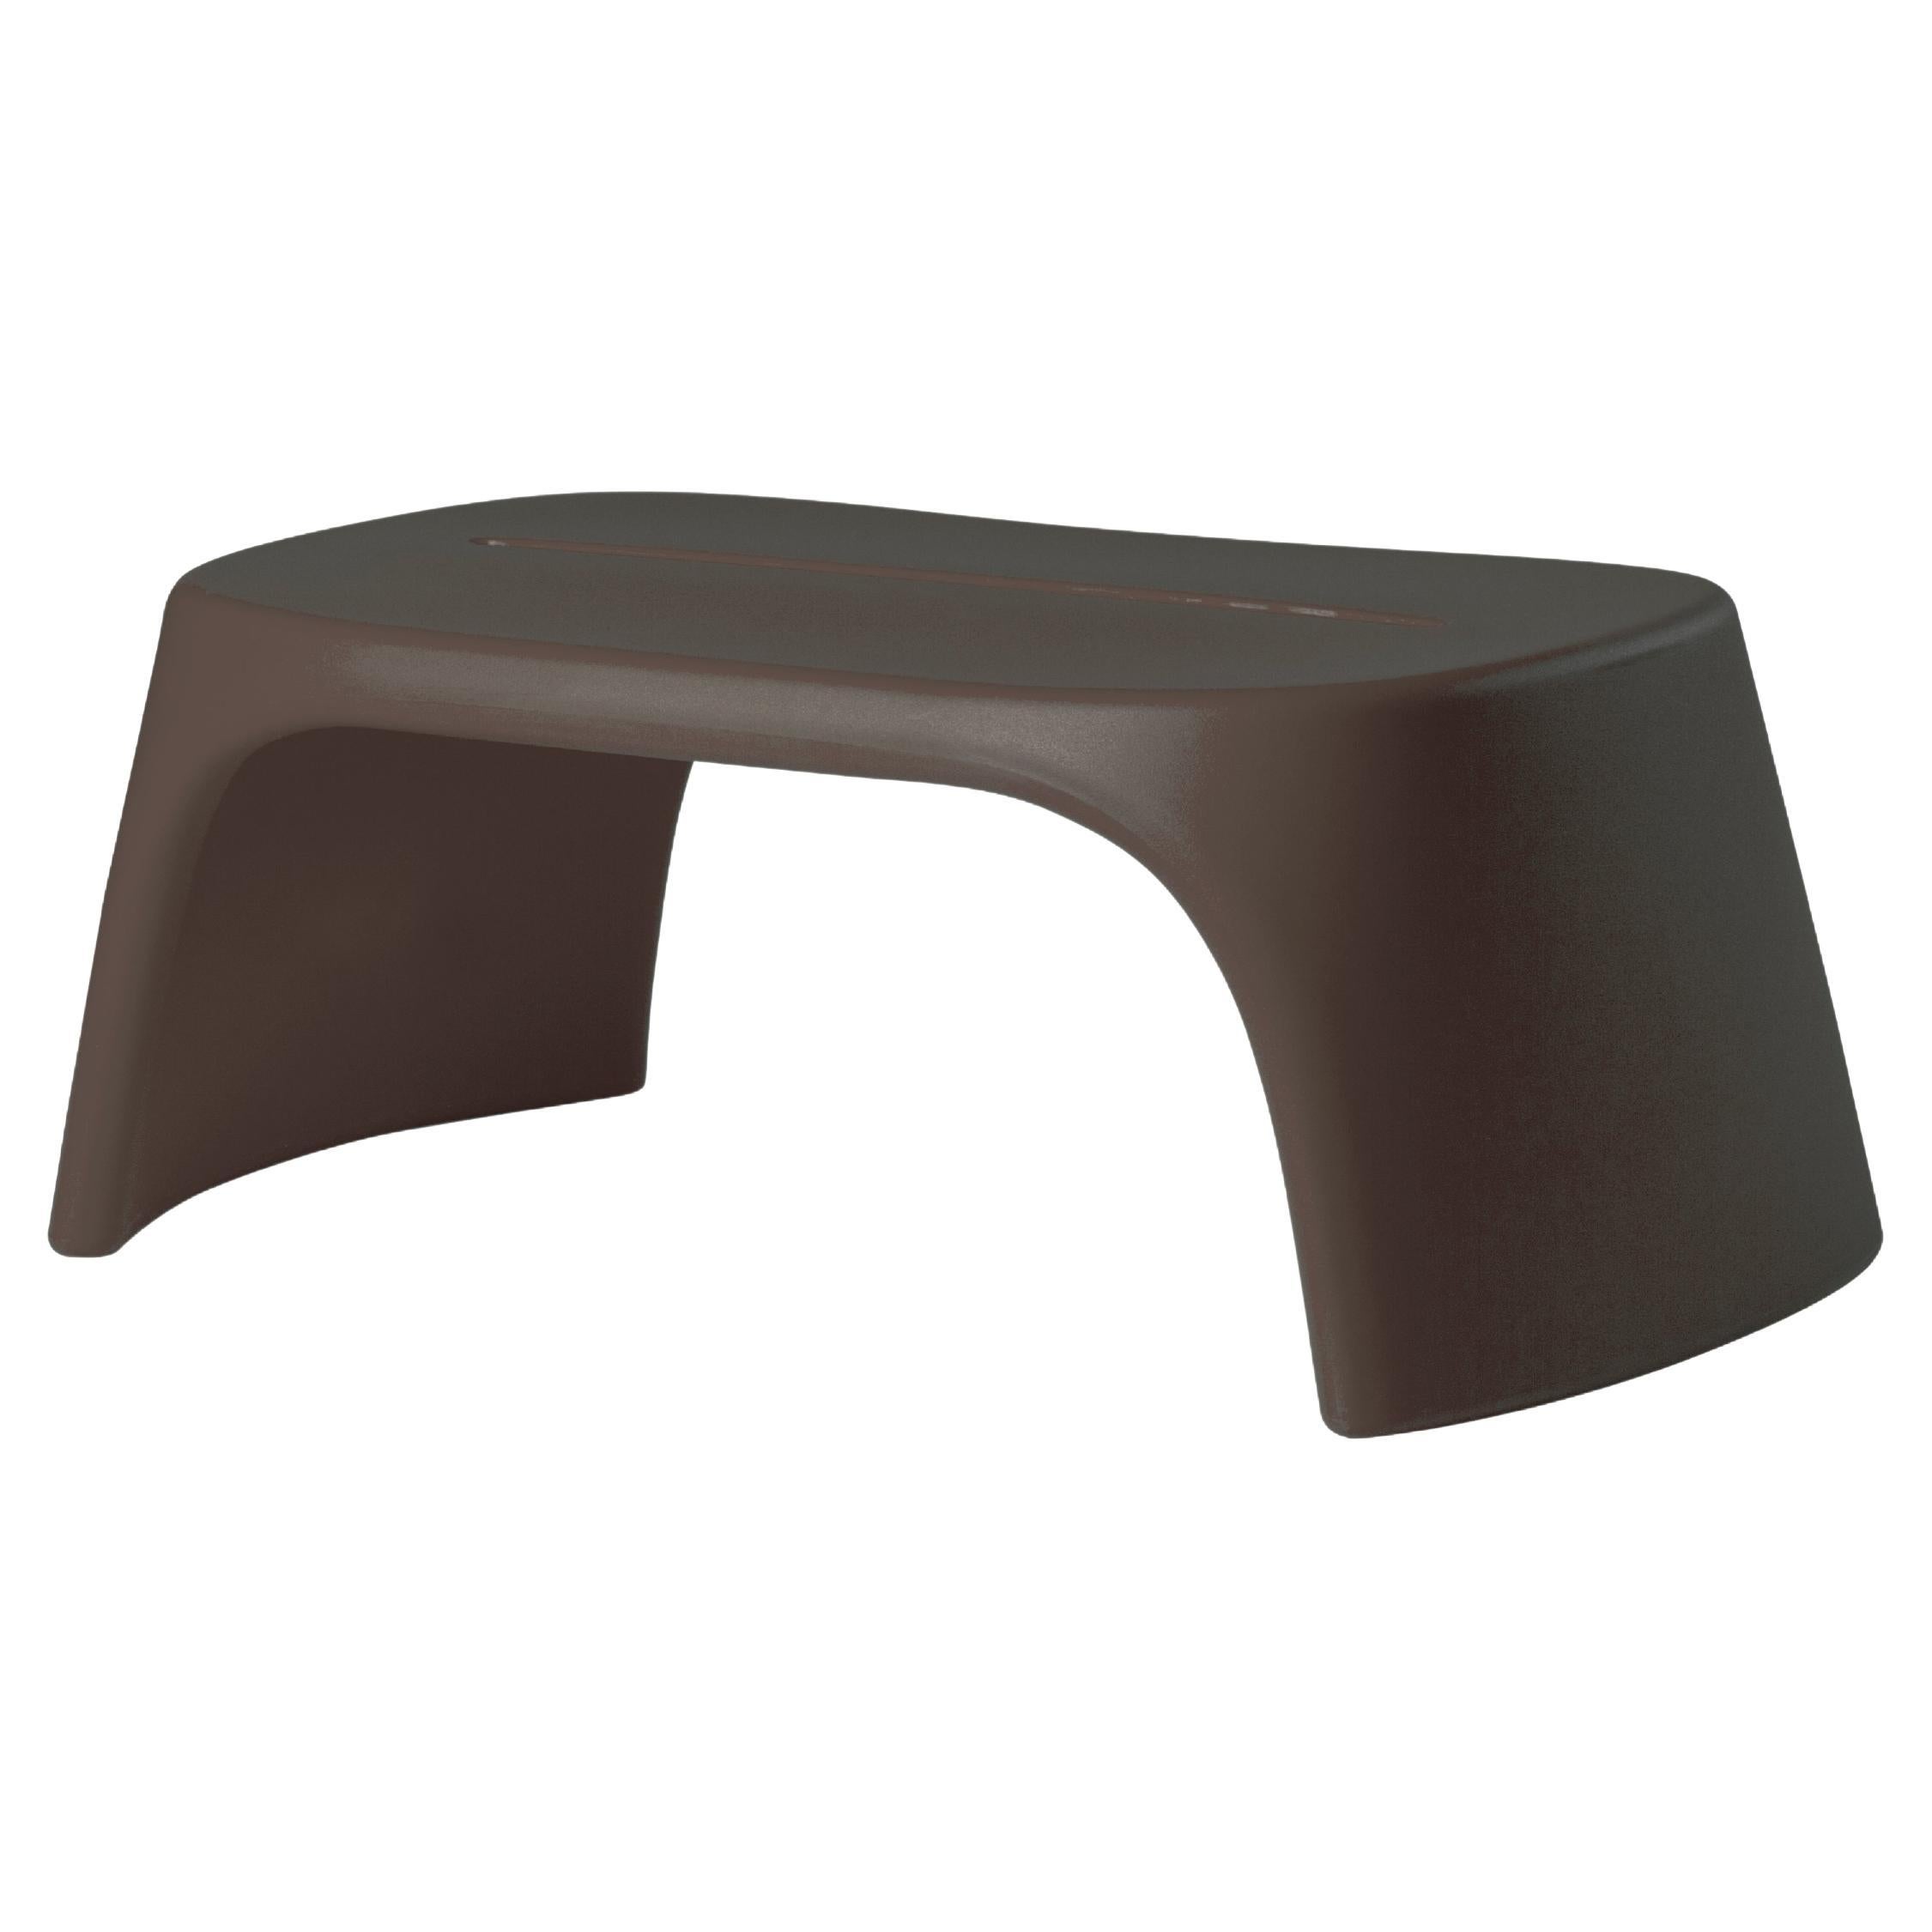 Slide Design Amélie Panchetta Bench in Chocolate Brown by Italo Pertichini For Sale